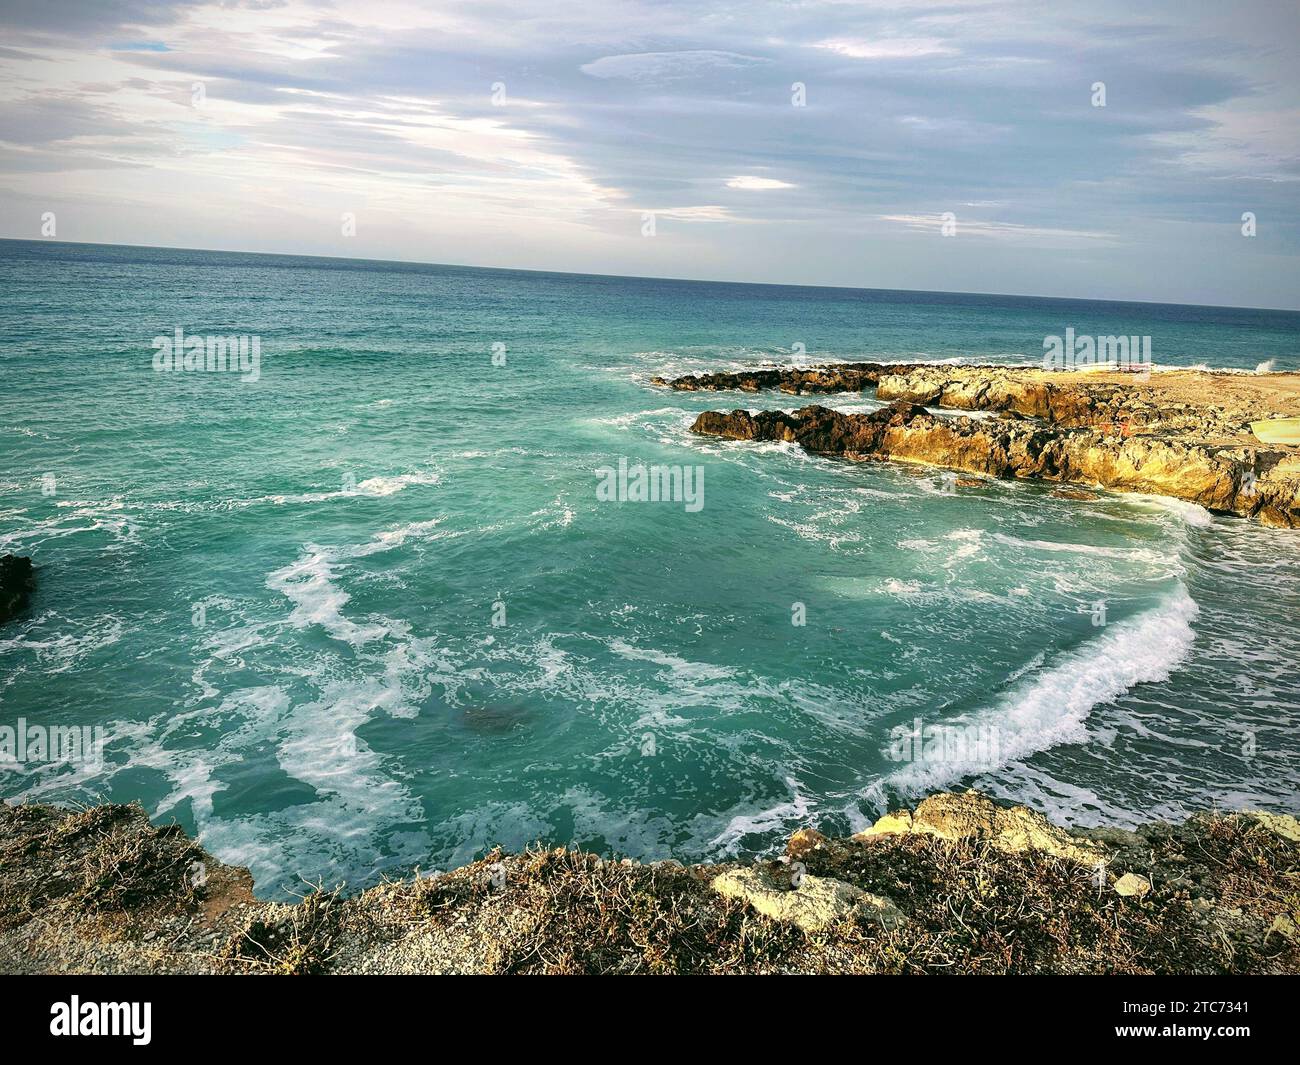 A stunning seascape with rocky cliffs and crystal blue waters Stock Photo